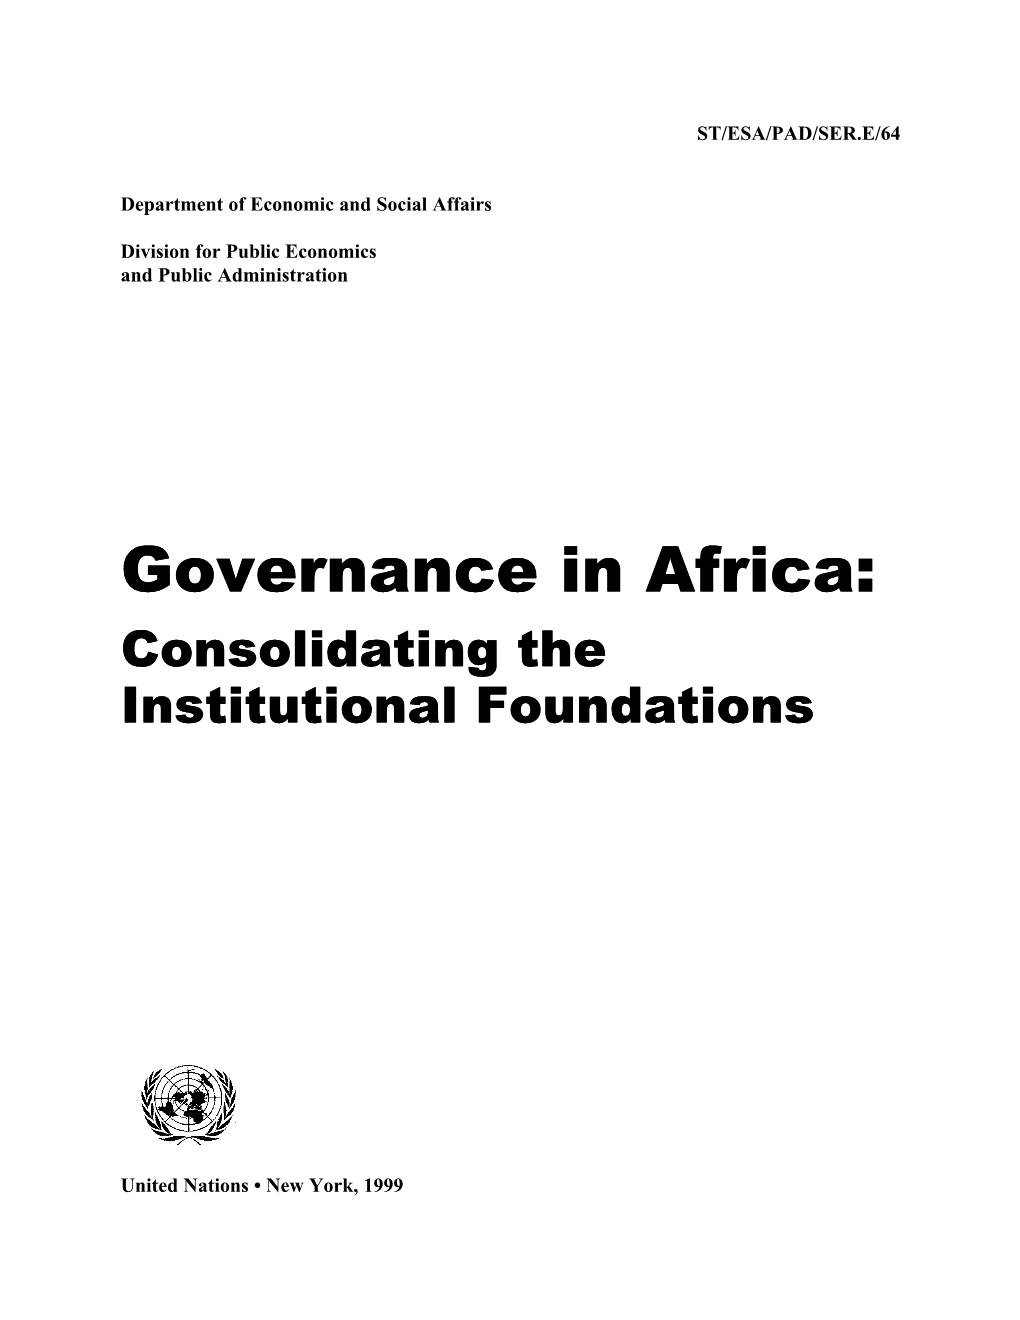 Governance in Africa: Consolidating the Institutional Foundations